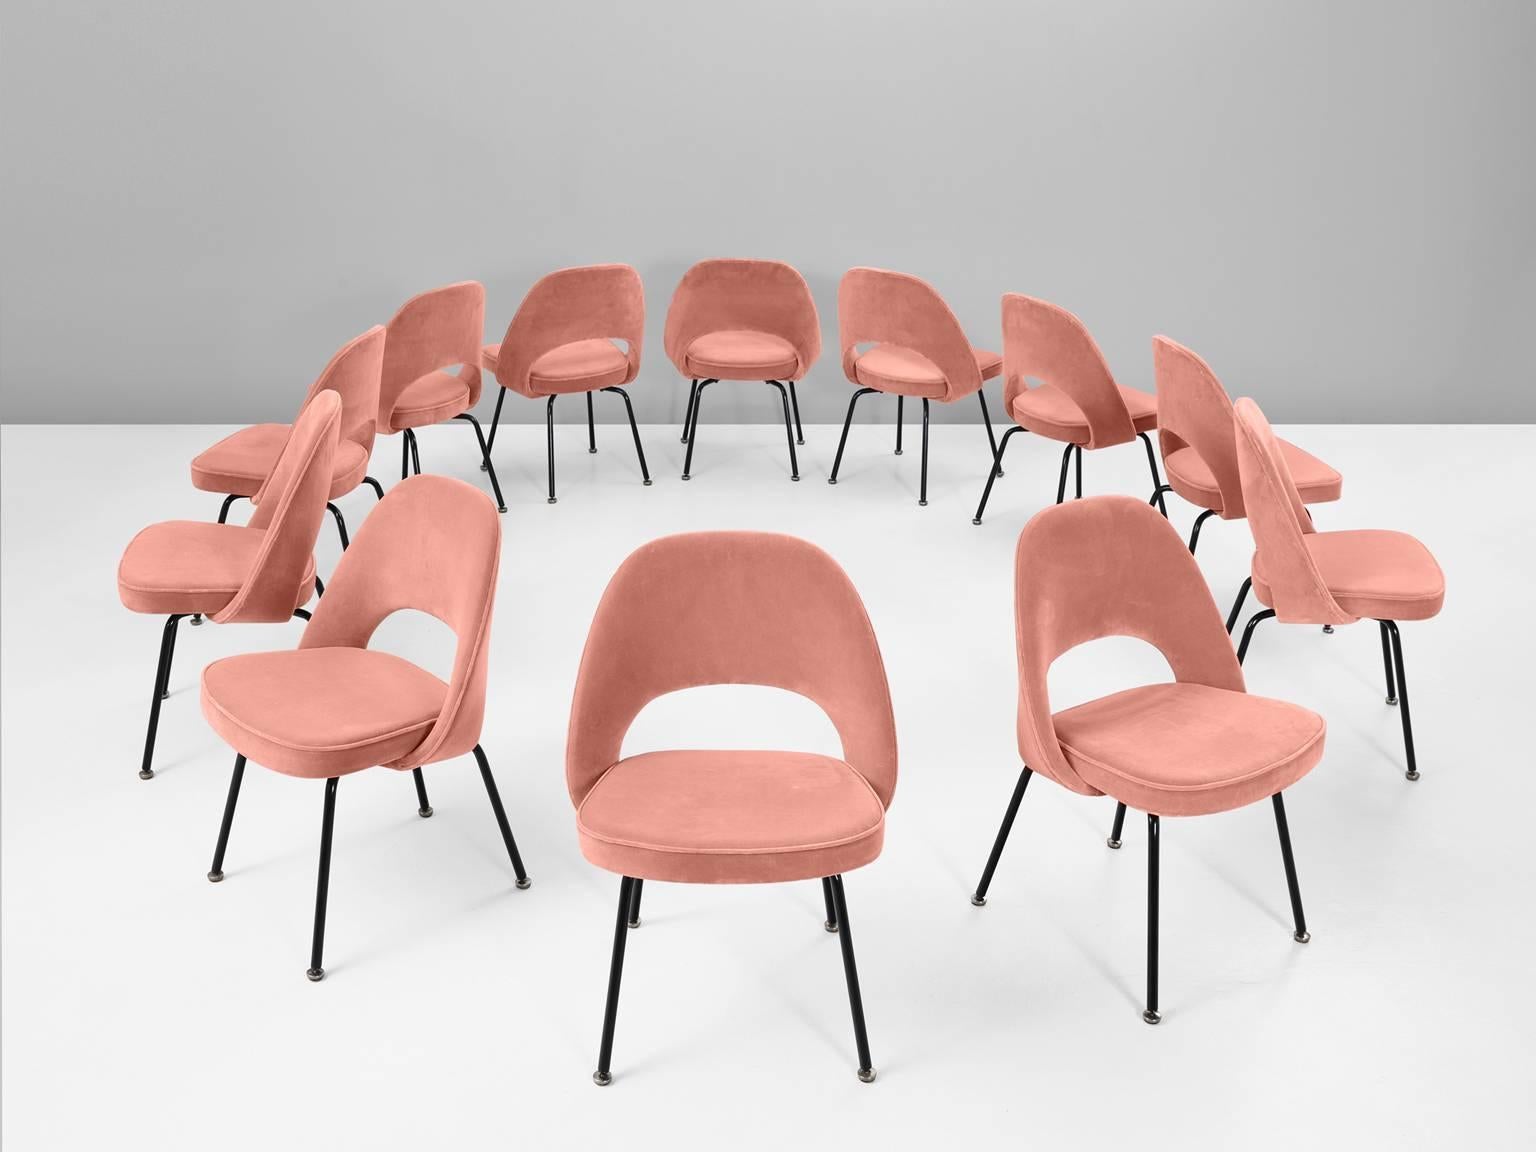 Eero Saarinen for Knoll International, set of eight chairs model 72, in metal and pink fabric, by United States 1948. 

Eight organic shaped chairs designed by Eero Saarinen. This iconic model is reupholstered in a pink velvet fabric. The chairs